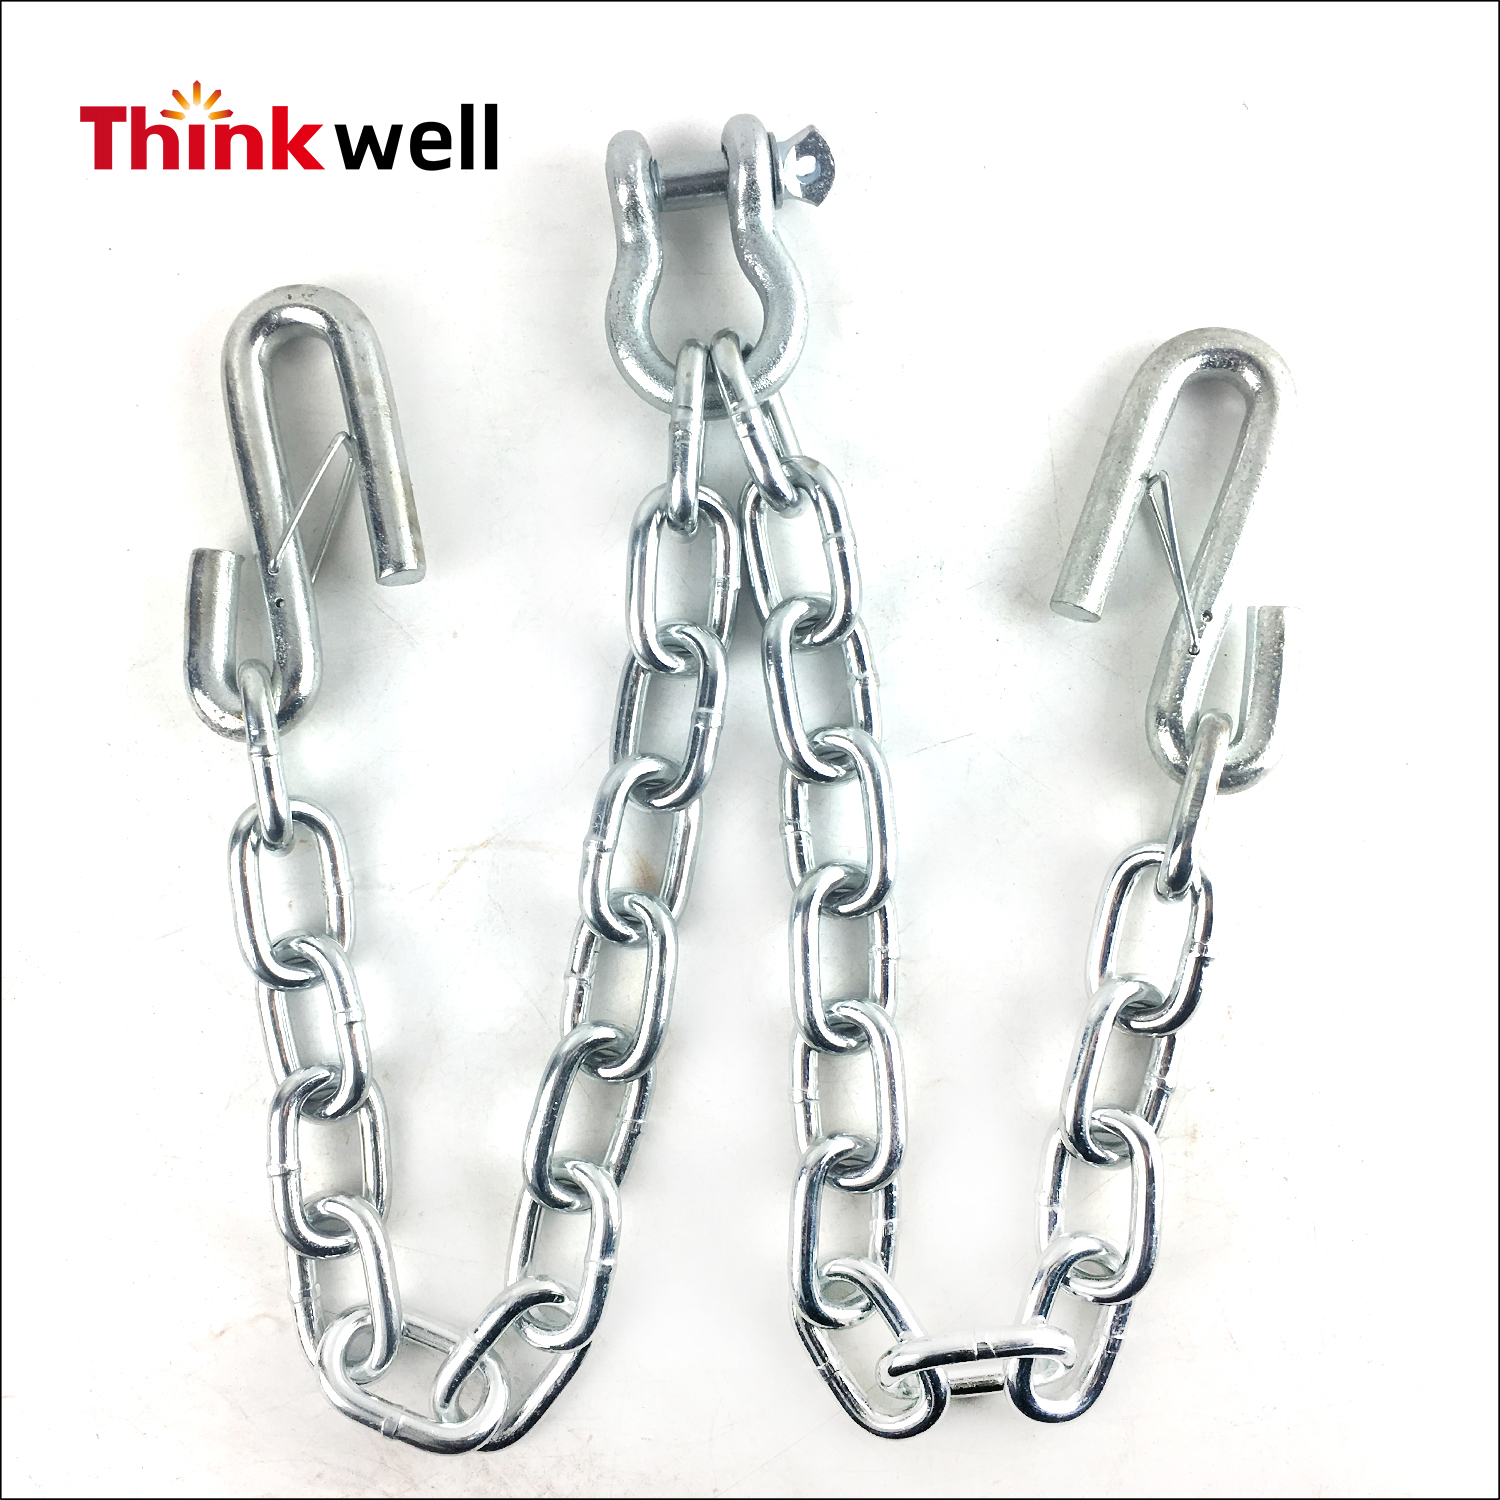  G30 Traielr Safety Chain with S hook